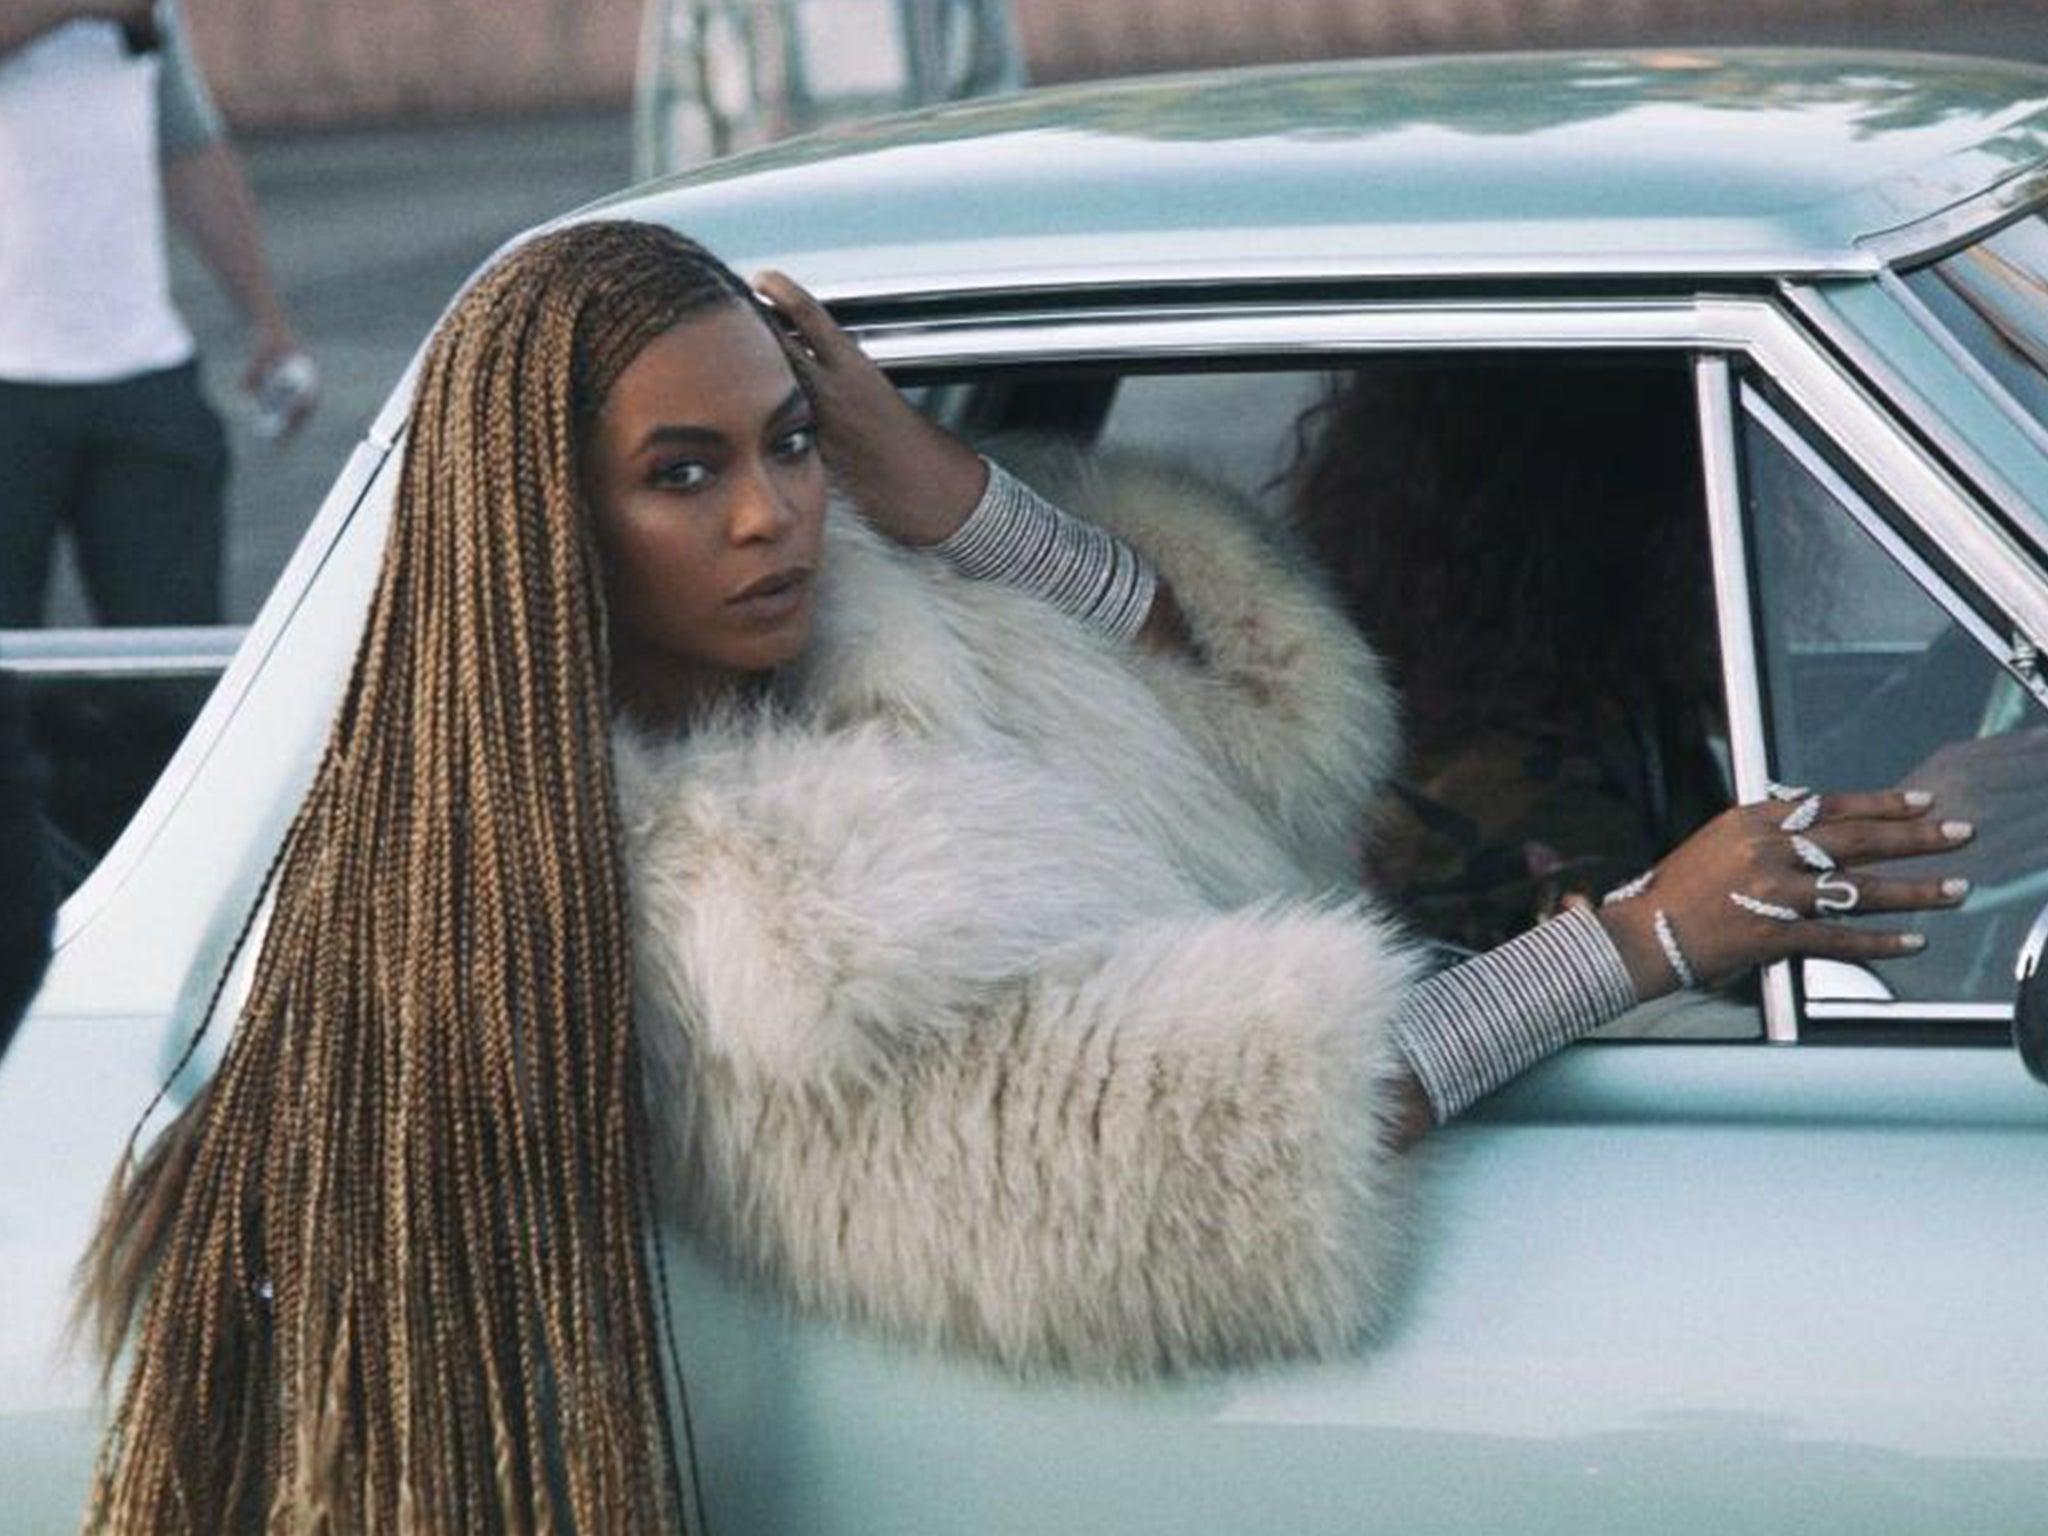 Beyonce's Lemonade album now streaming on Spotify and Apple Music